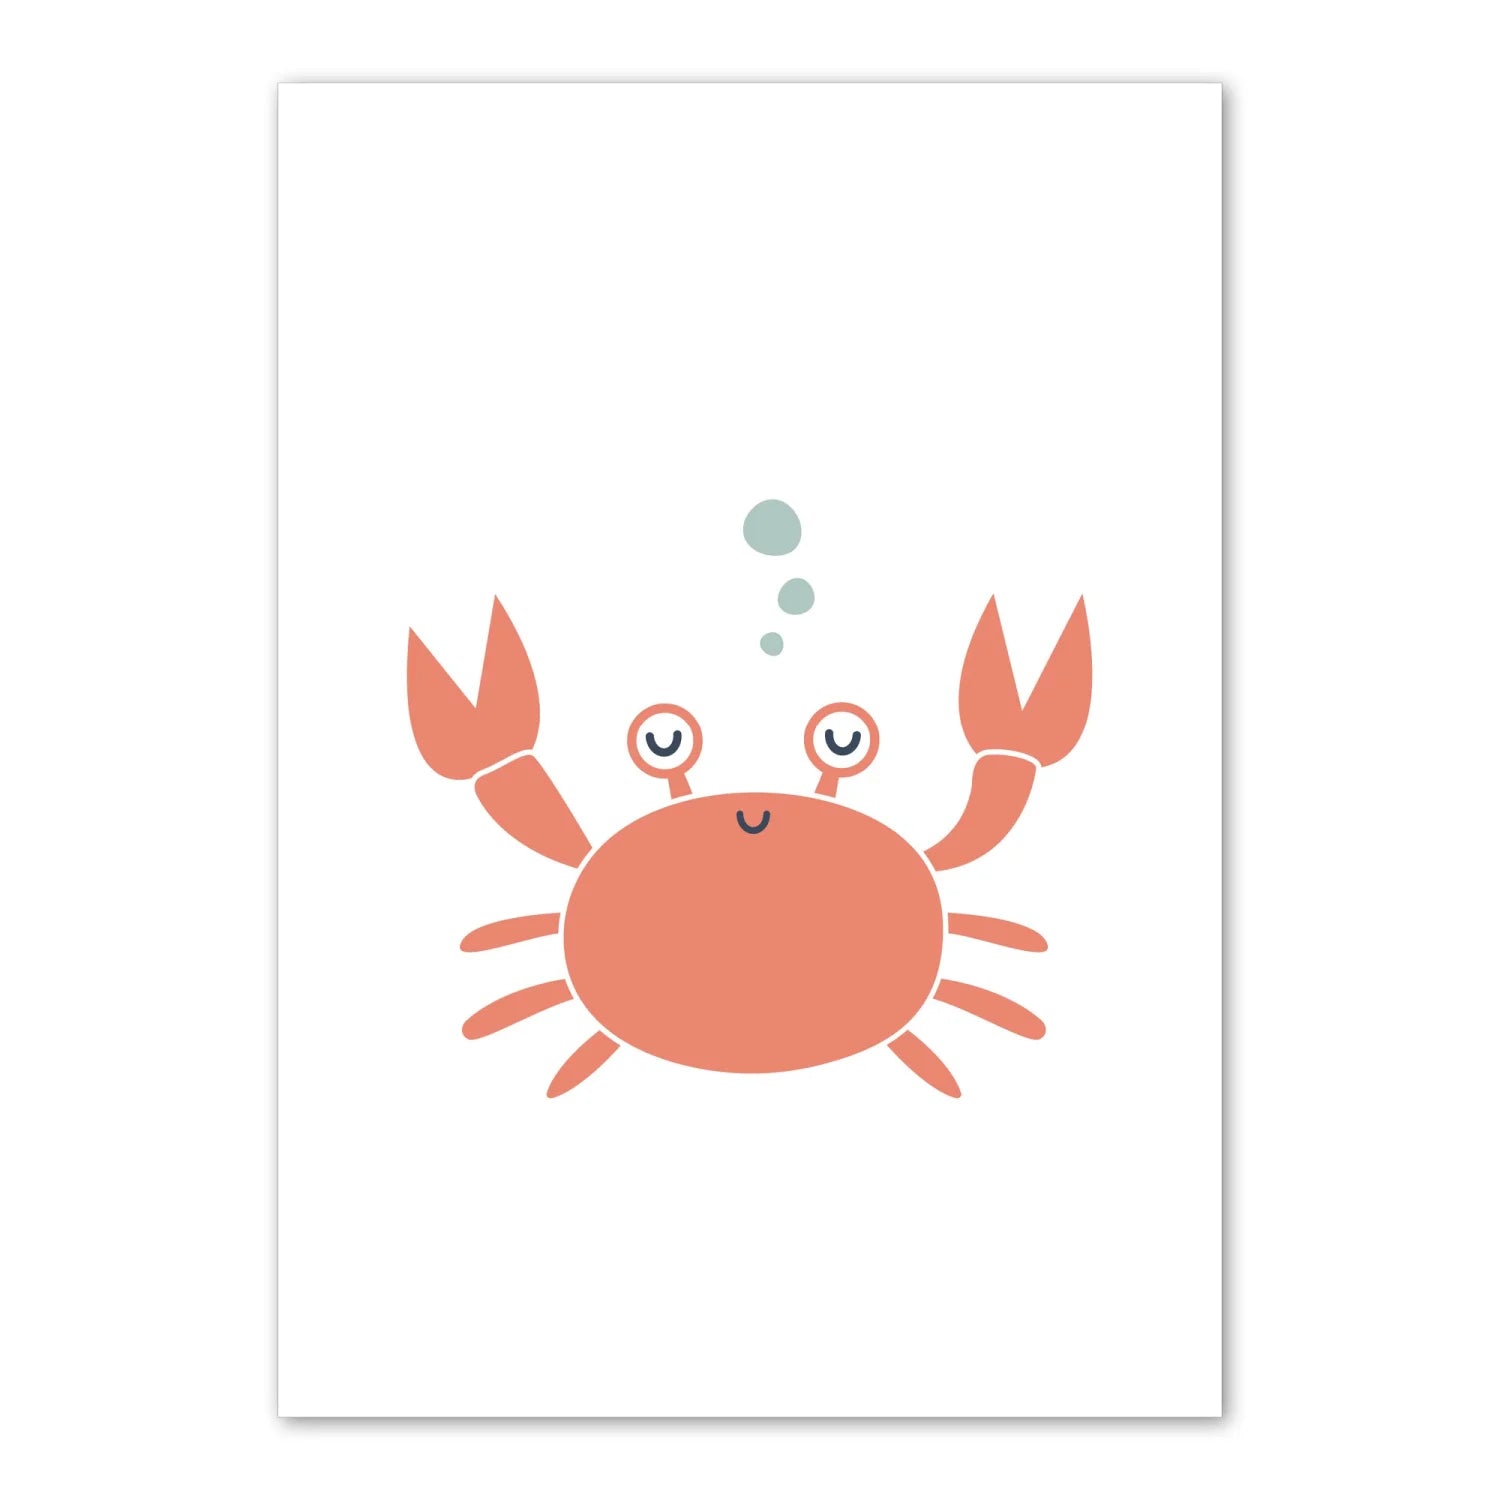 Star~Fish and Crab Print - Prints By The Sea